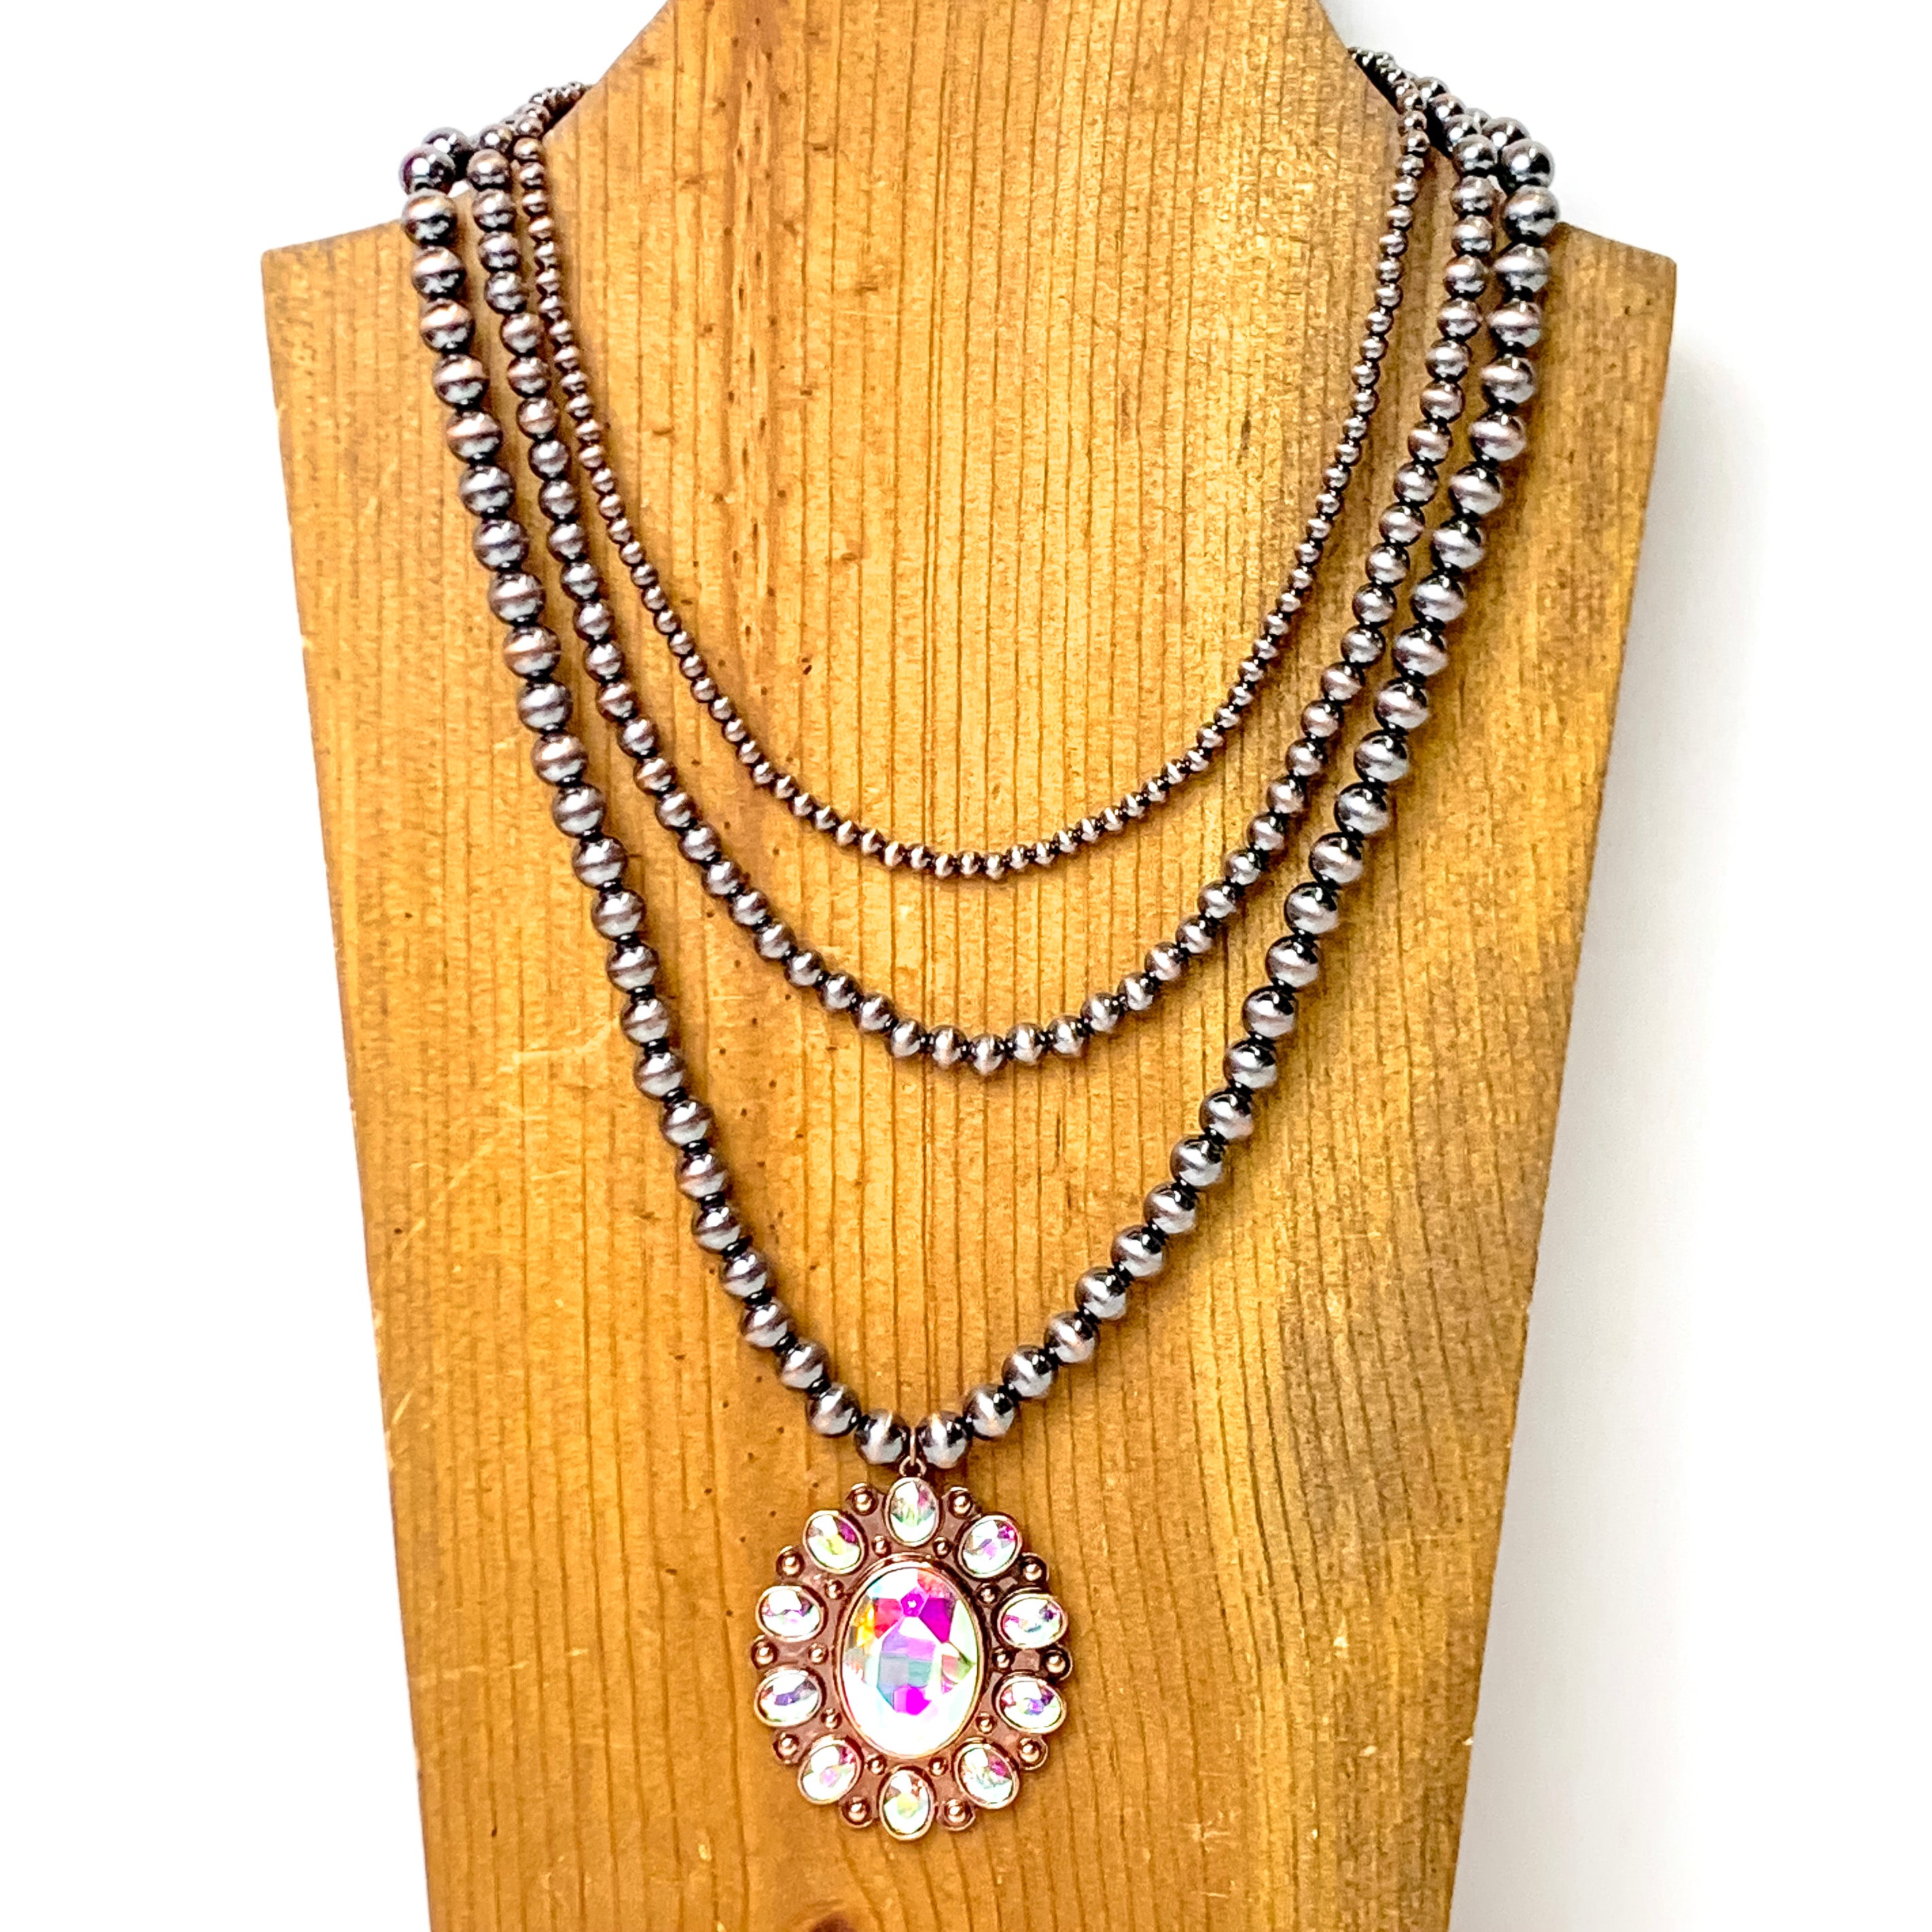 Southwest Splendor Faux Navajo Pearl Necklace in Copper Tone - Giddy Up Glamour Boutique